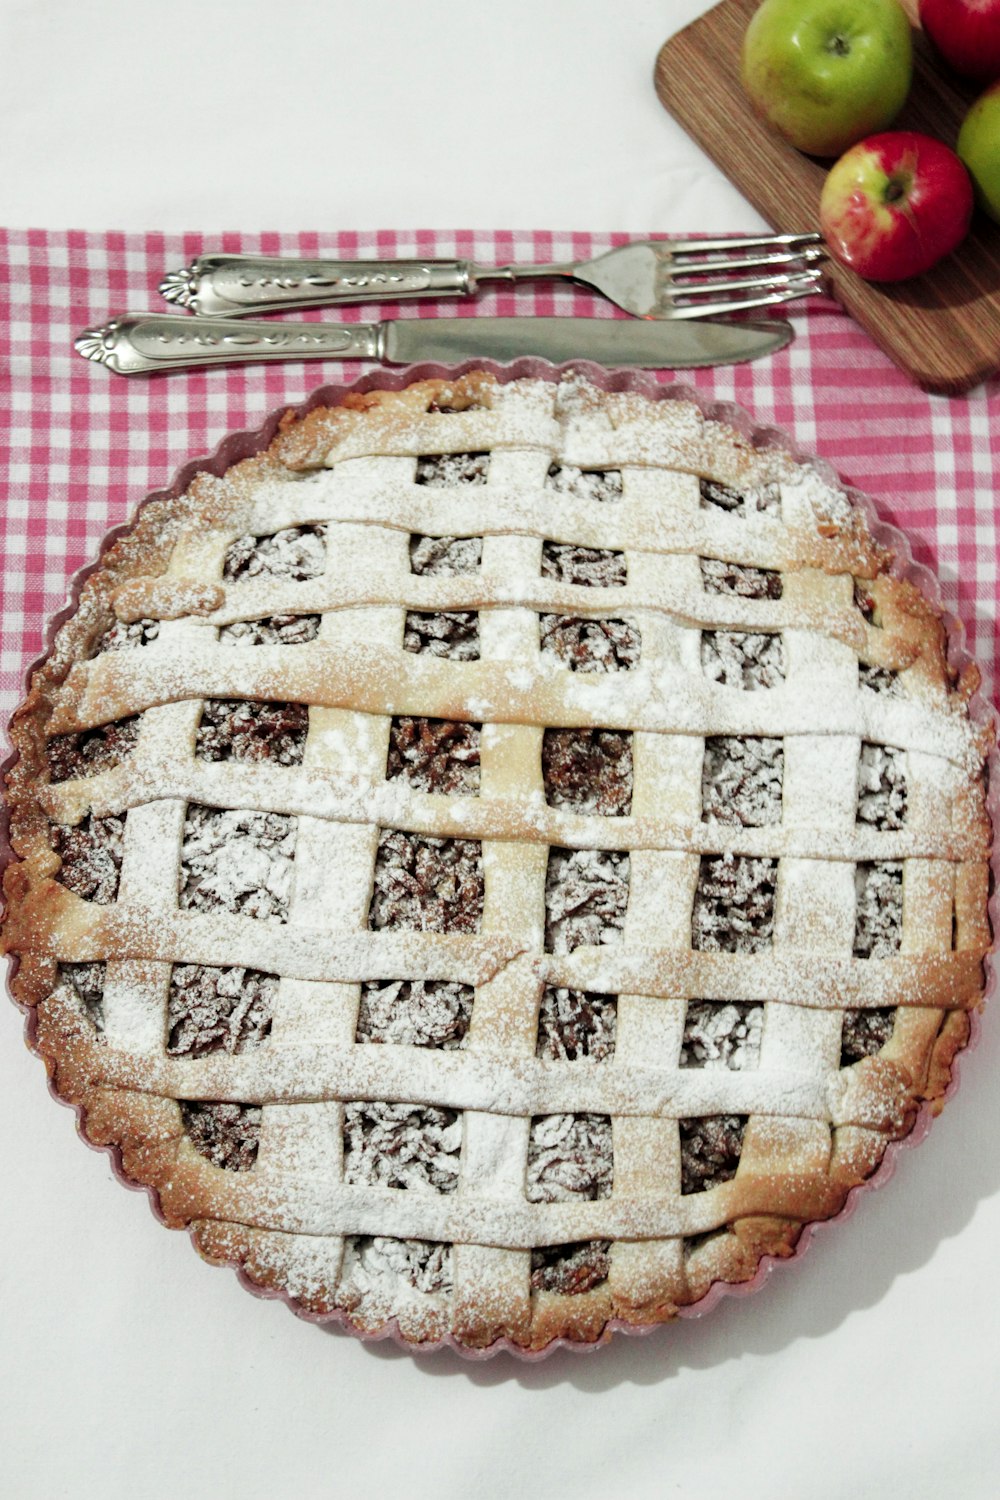 pie on red and white checkered table cloth